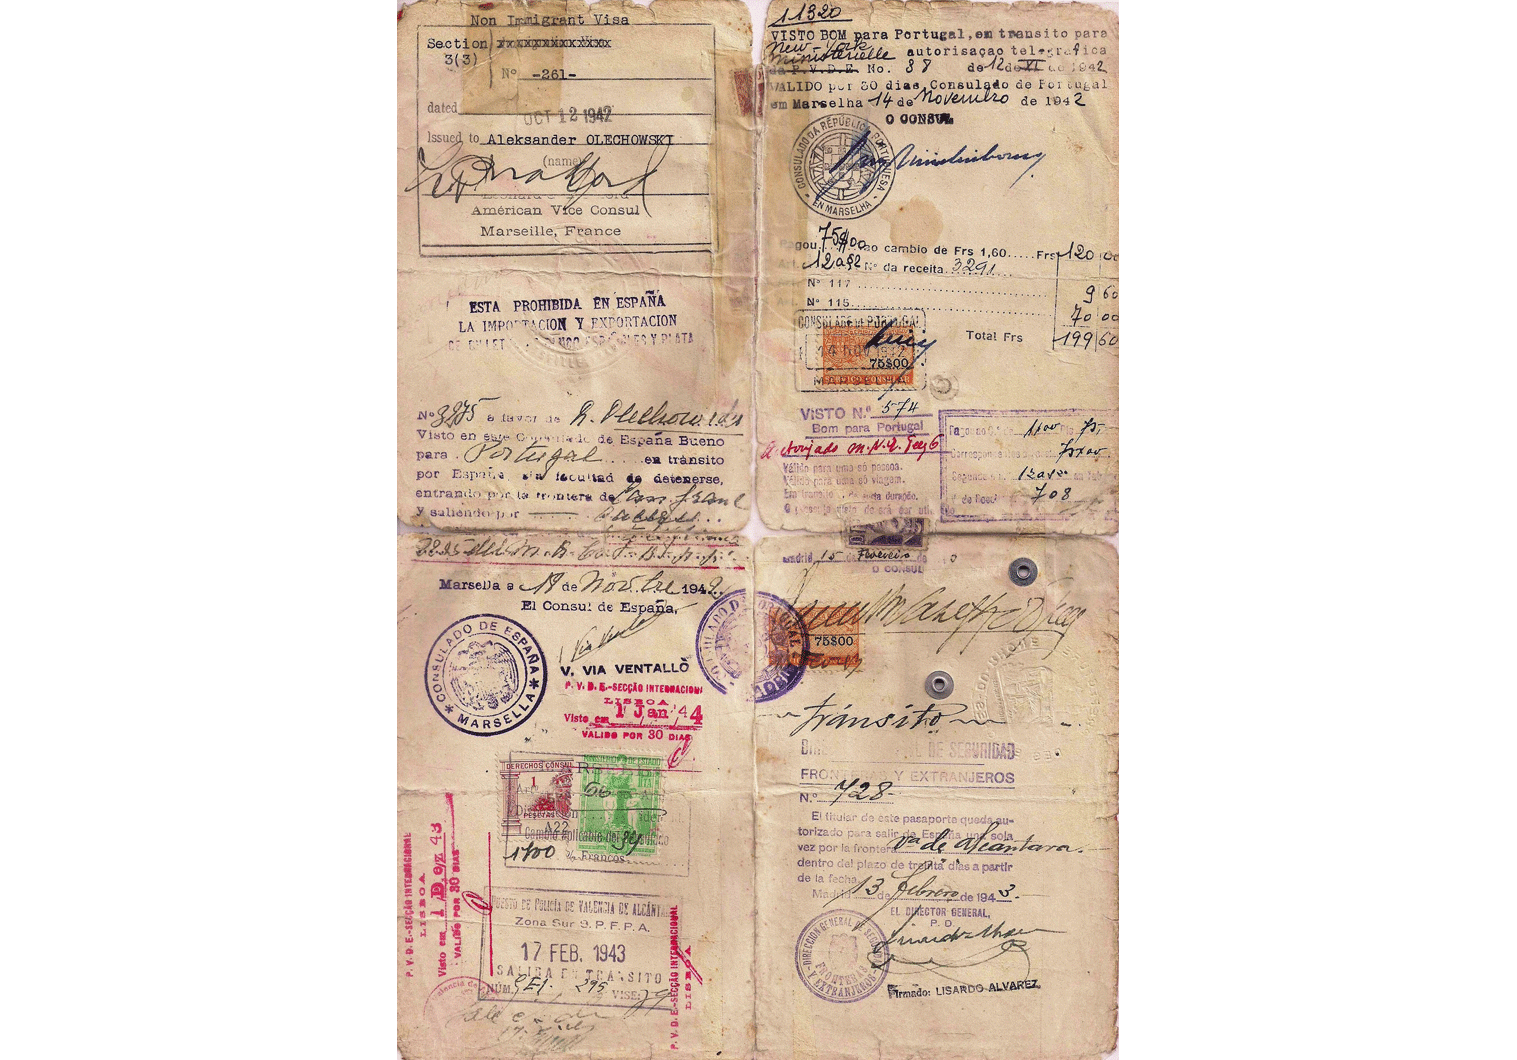 Amazing set of papers used to escape France